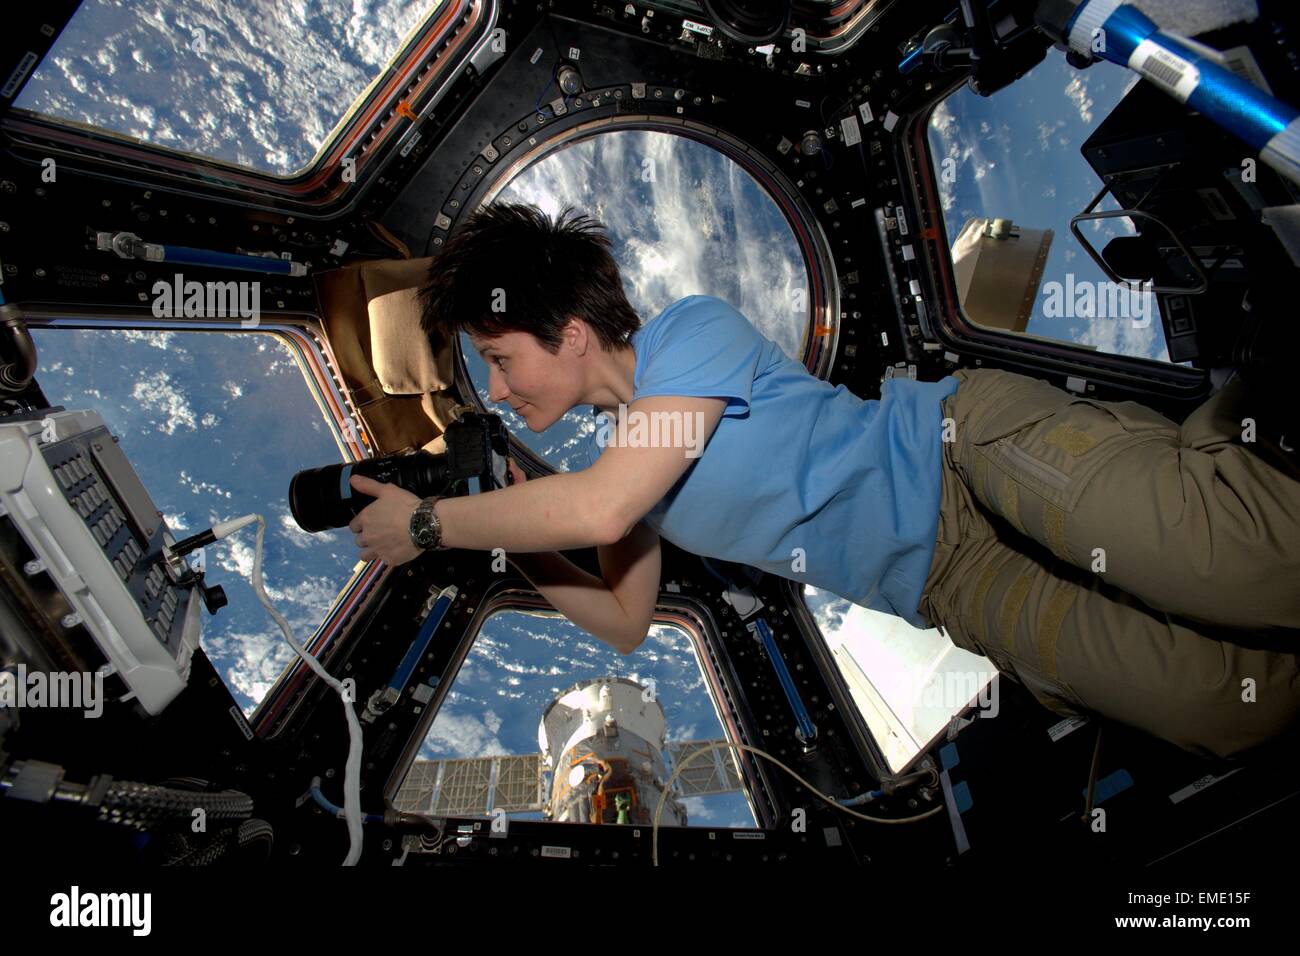 International Space Station Expedition 42 European Space Agency Astronaut Samantha Cristoforetti takes photos from inside the copula look out at Earth February 3, 2015 in Earth Orbit. Stock Photo